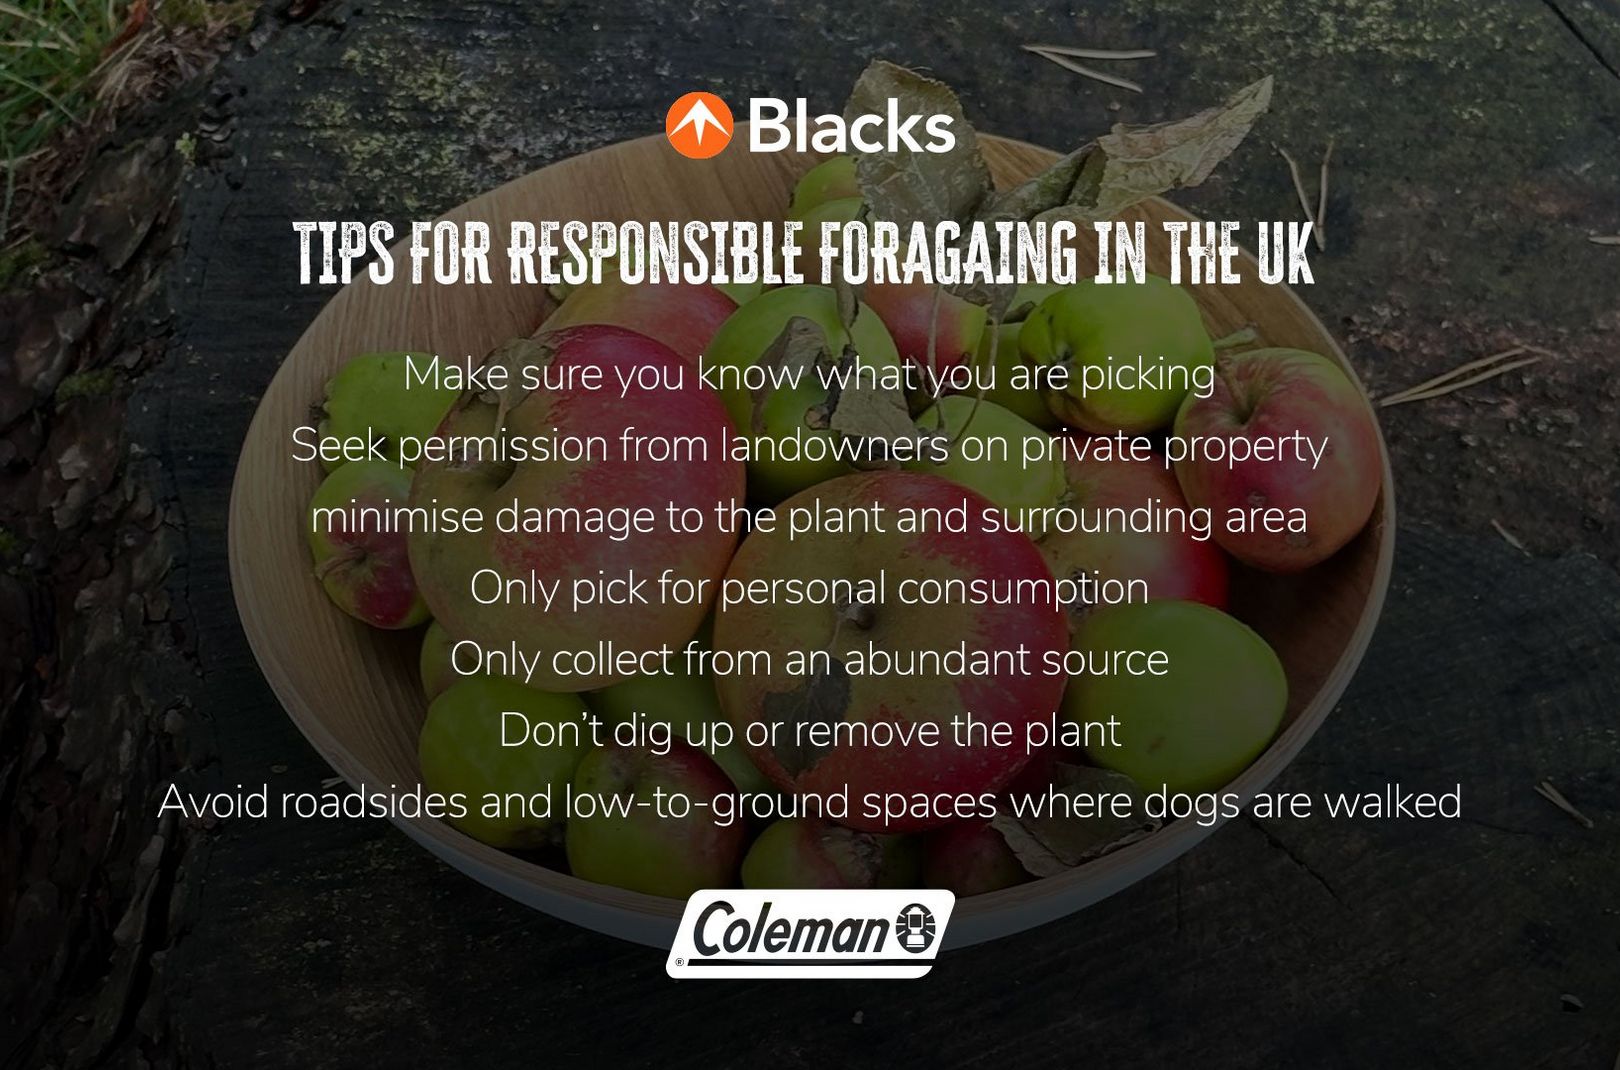 An infographic containing tips on how to forage foods responsibly in the UK